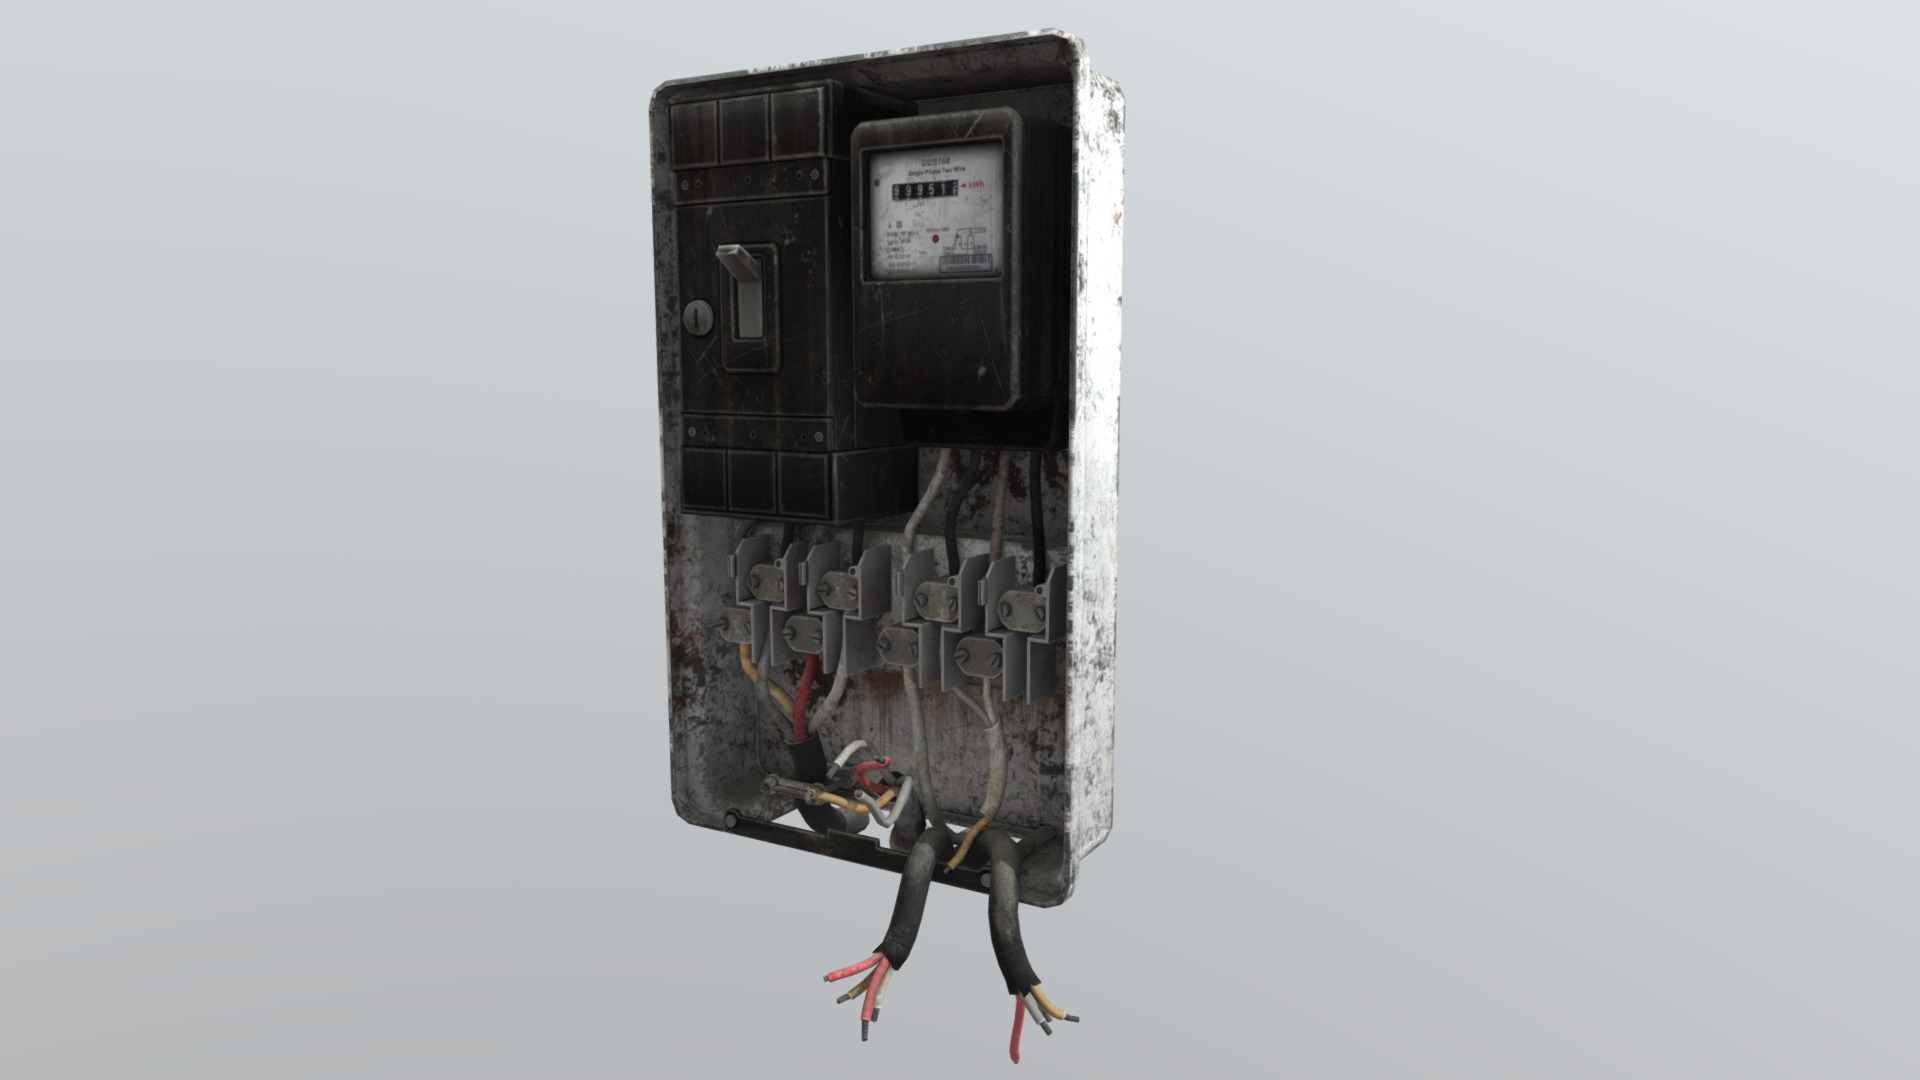 3D model Low Poly 3D Electricity Box 01 - This is a 3D model of the Low Poly 3D Electricity Box 01. The 3D model is about a black and white electrical device.